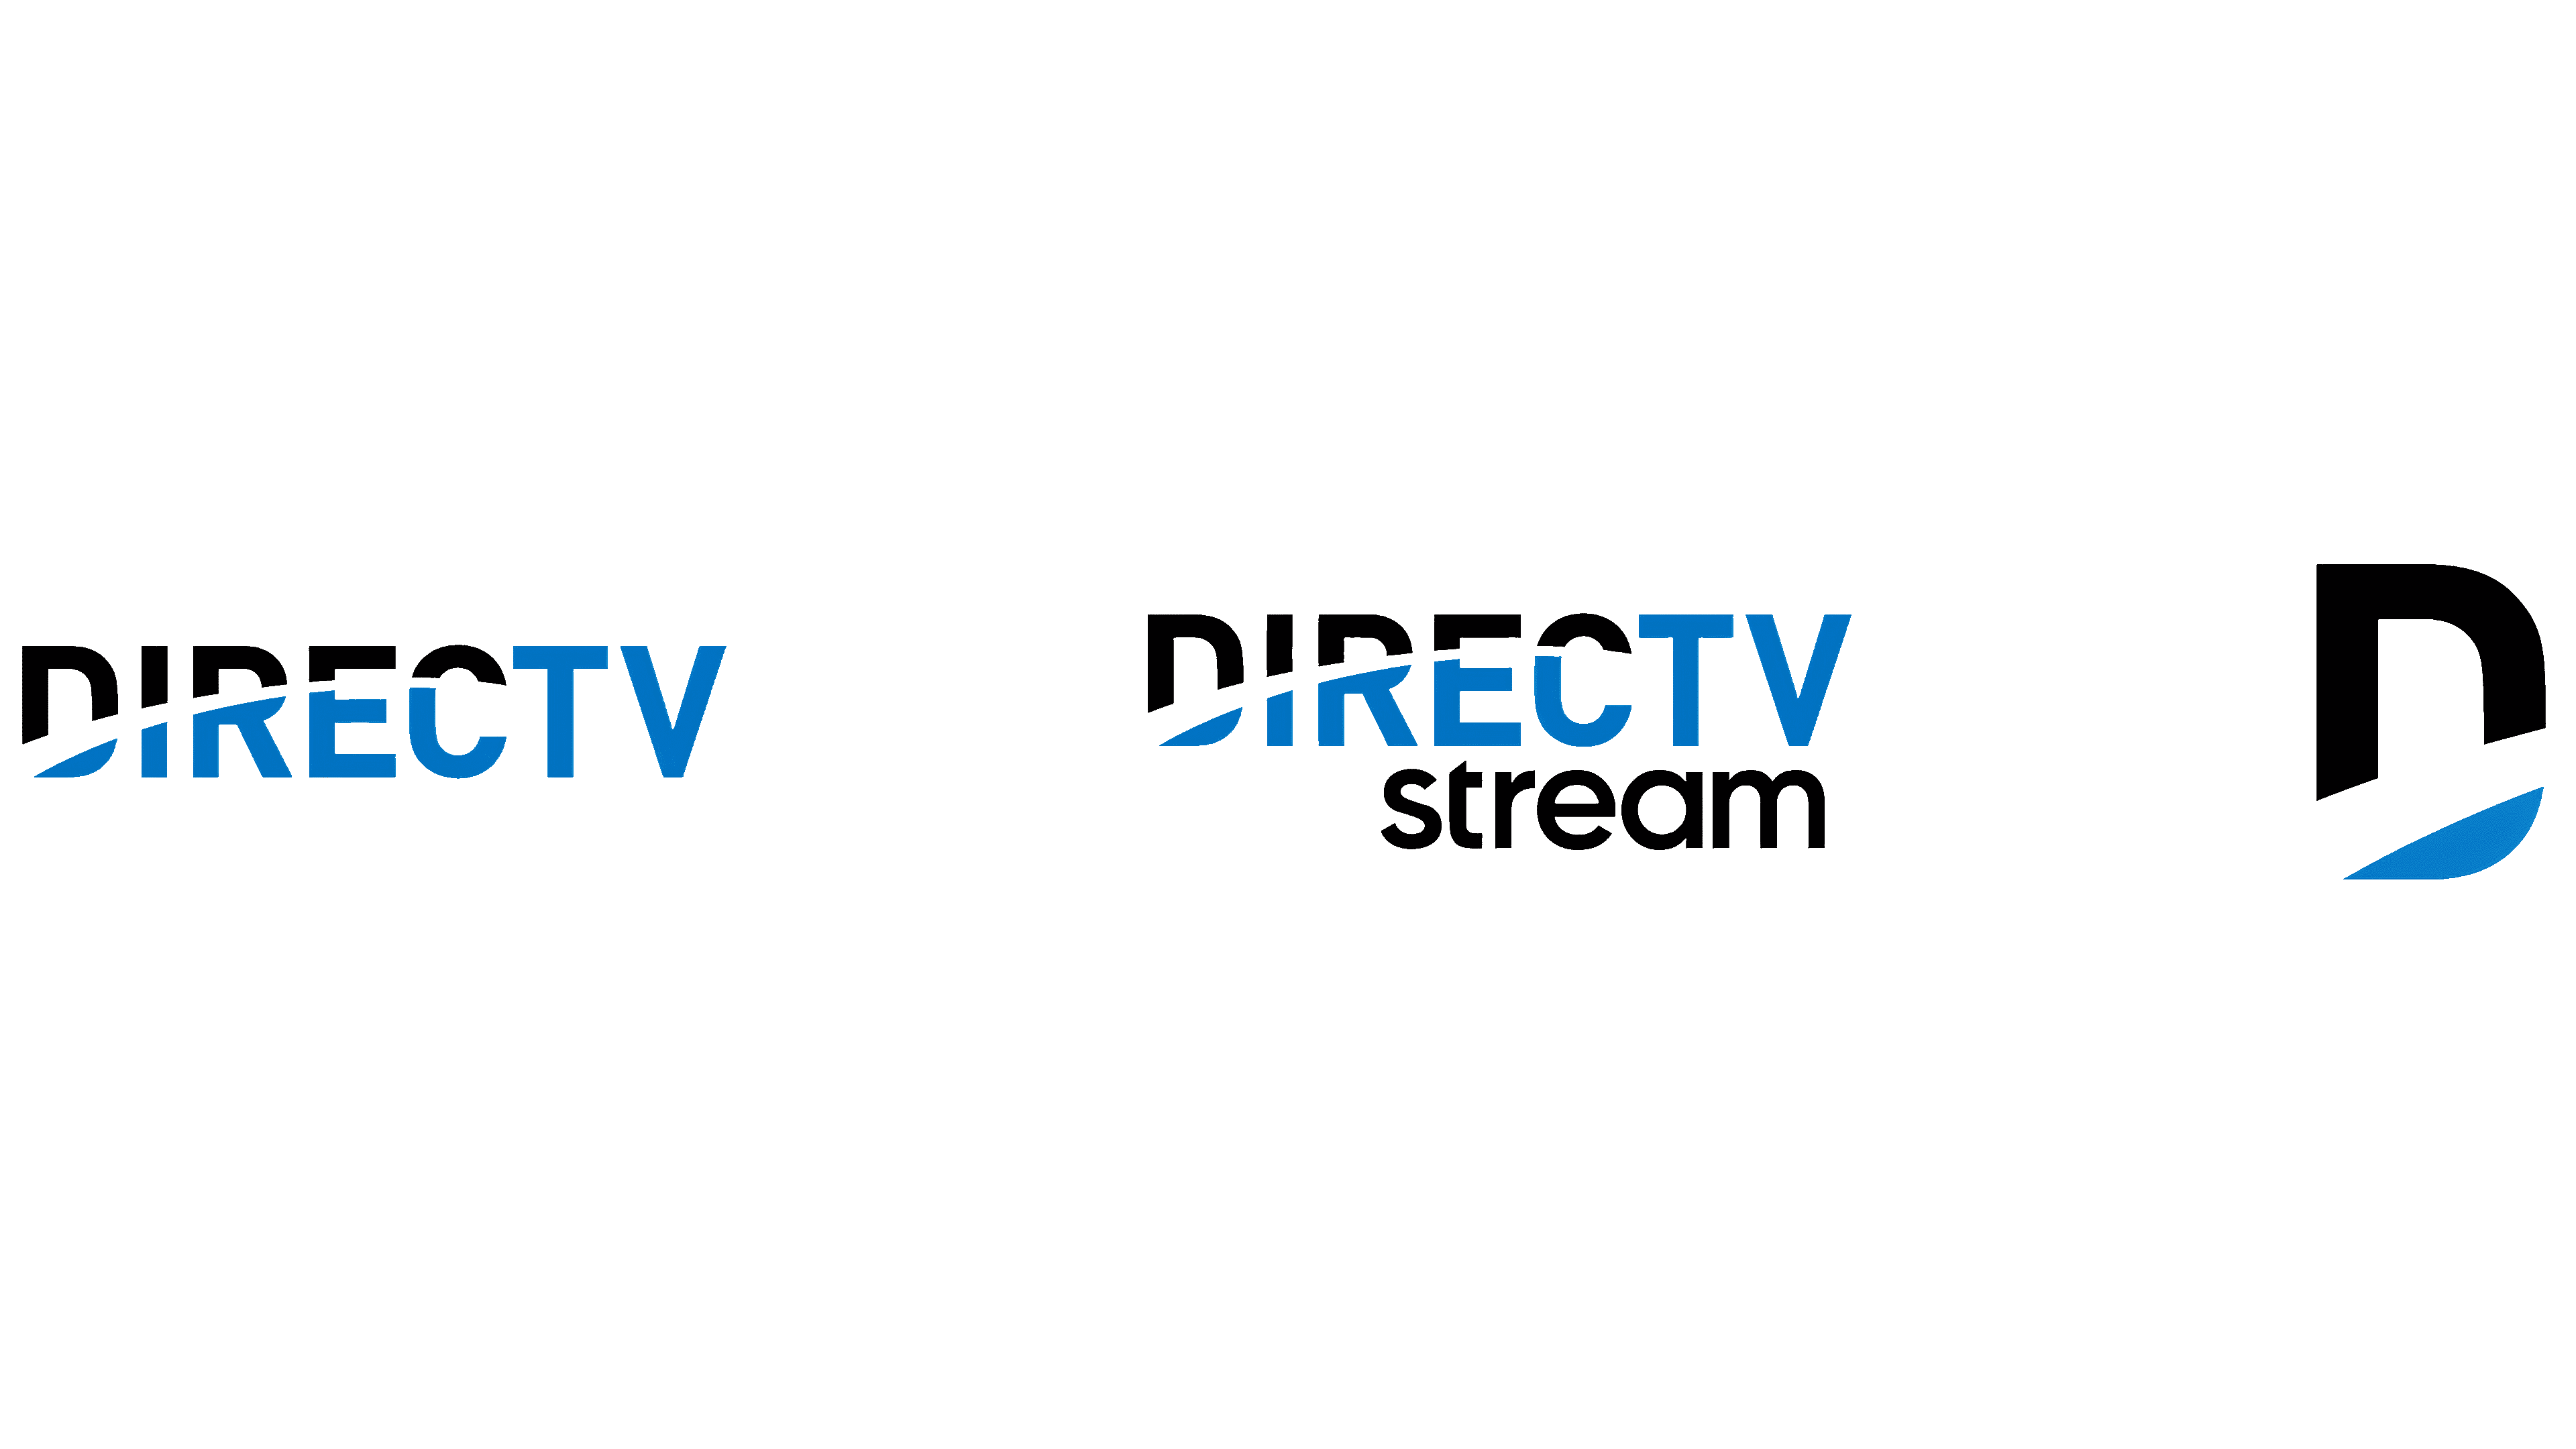 DirectTV has a new design style